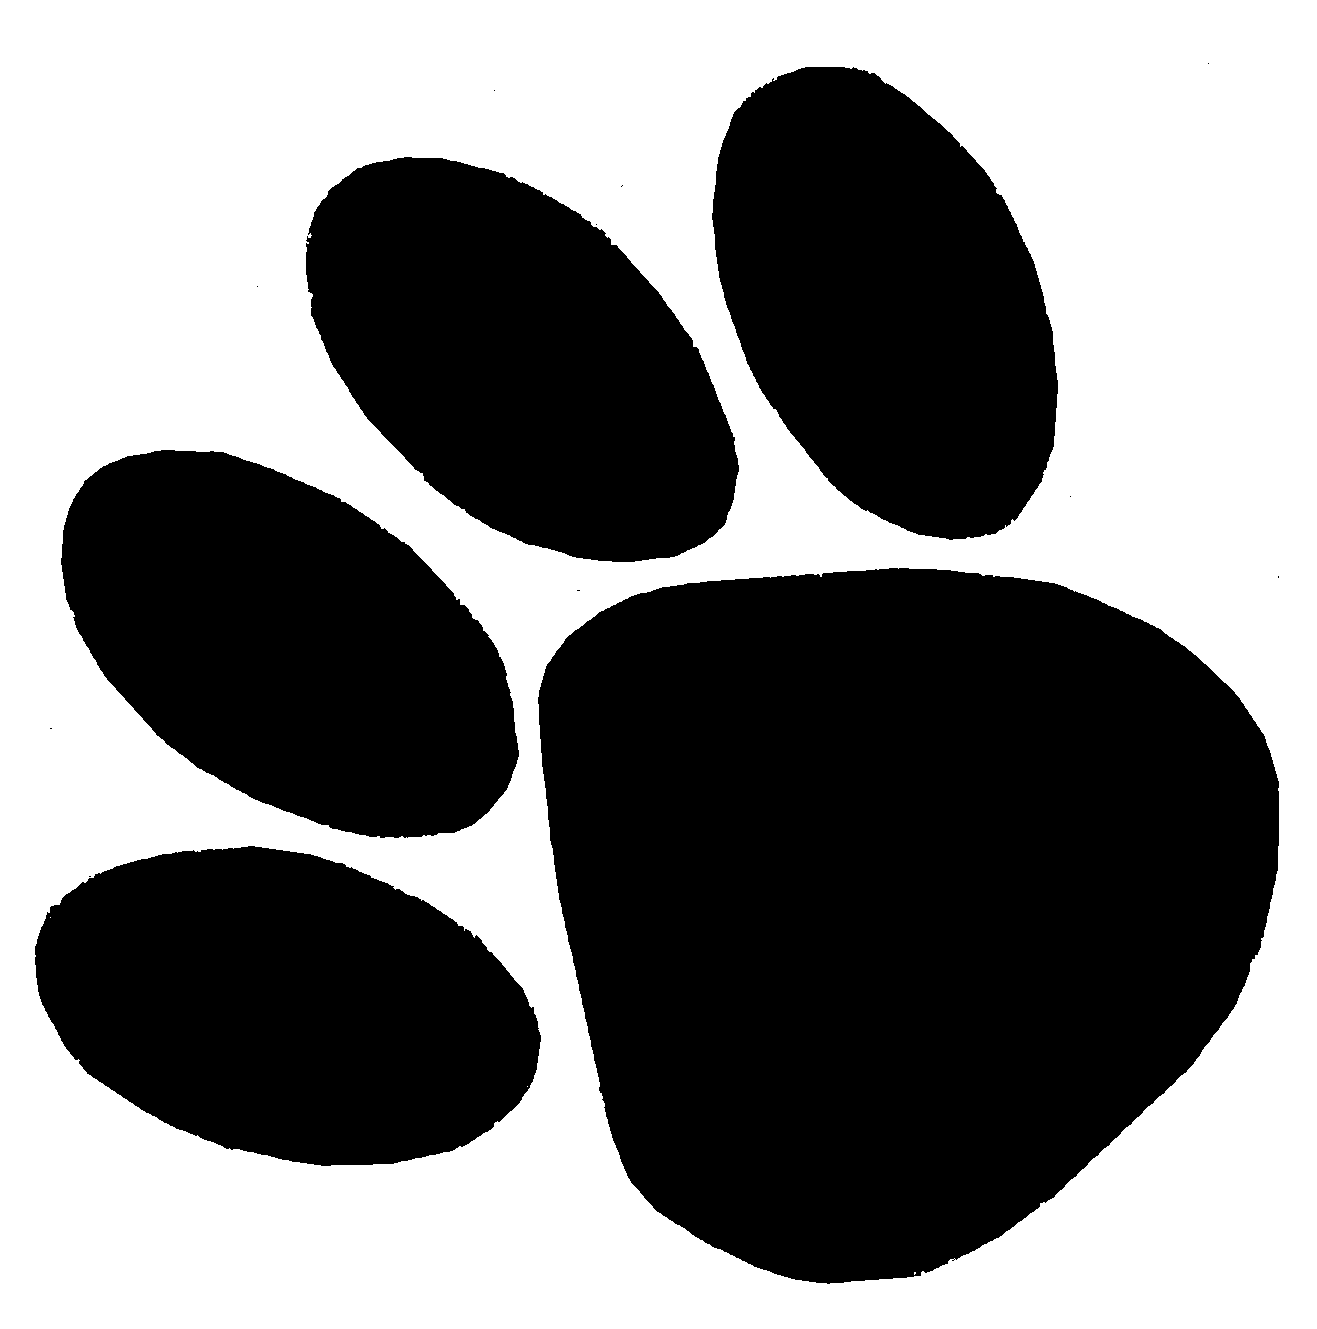 furry paw template